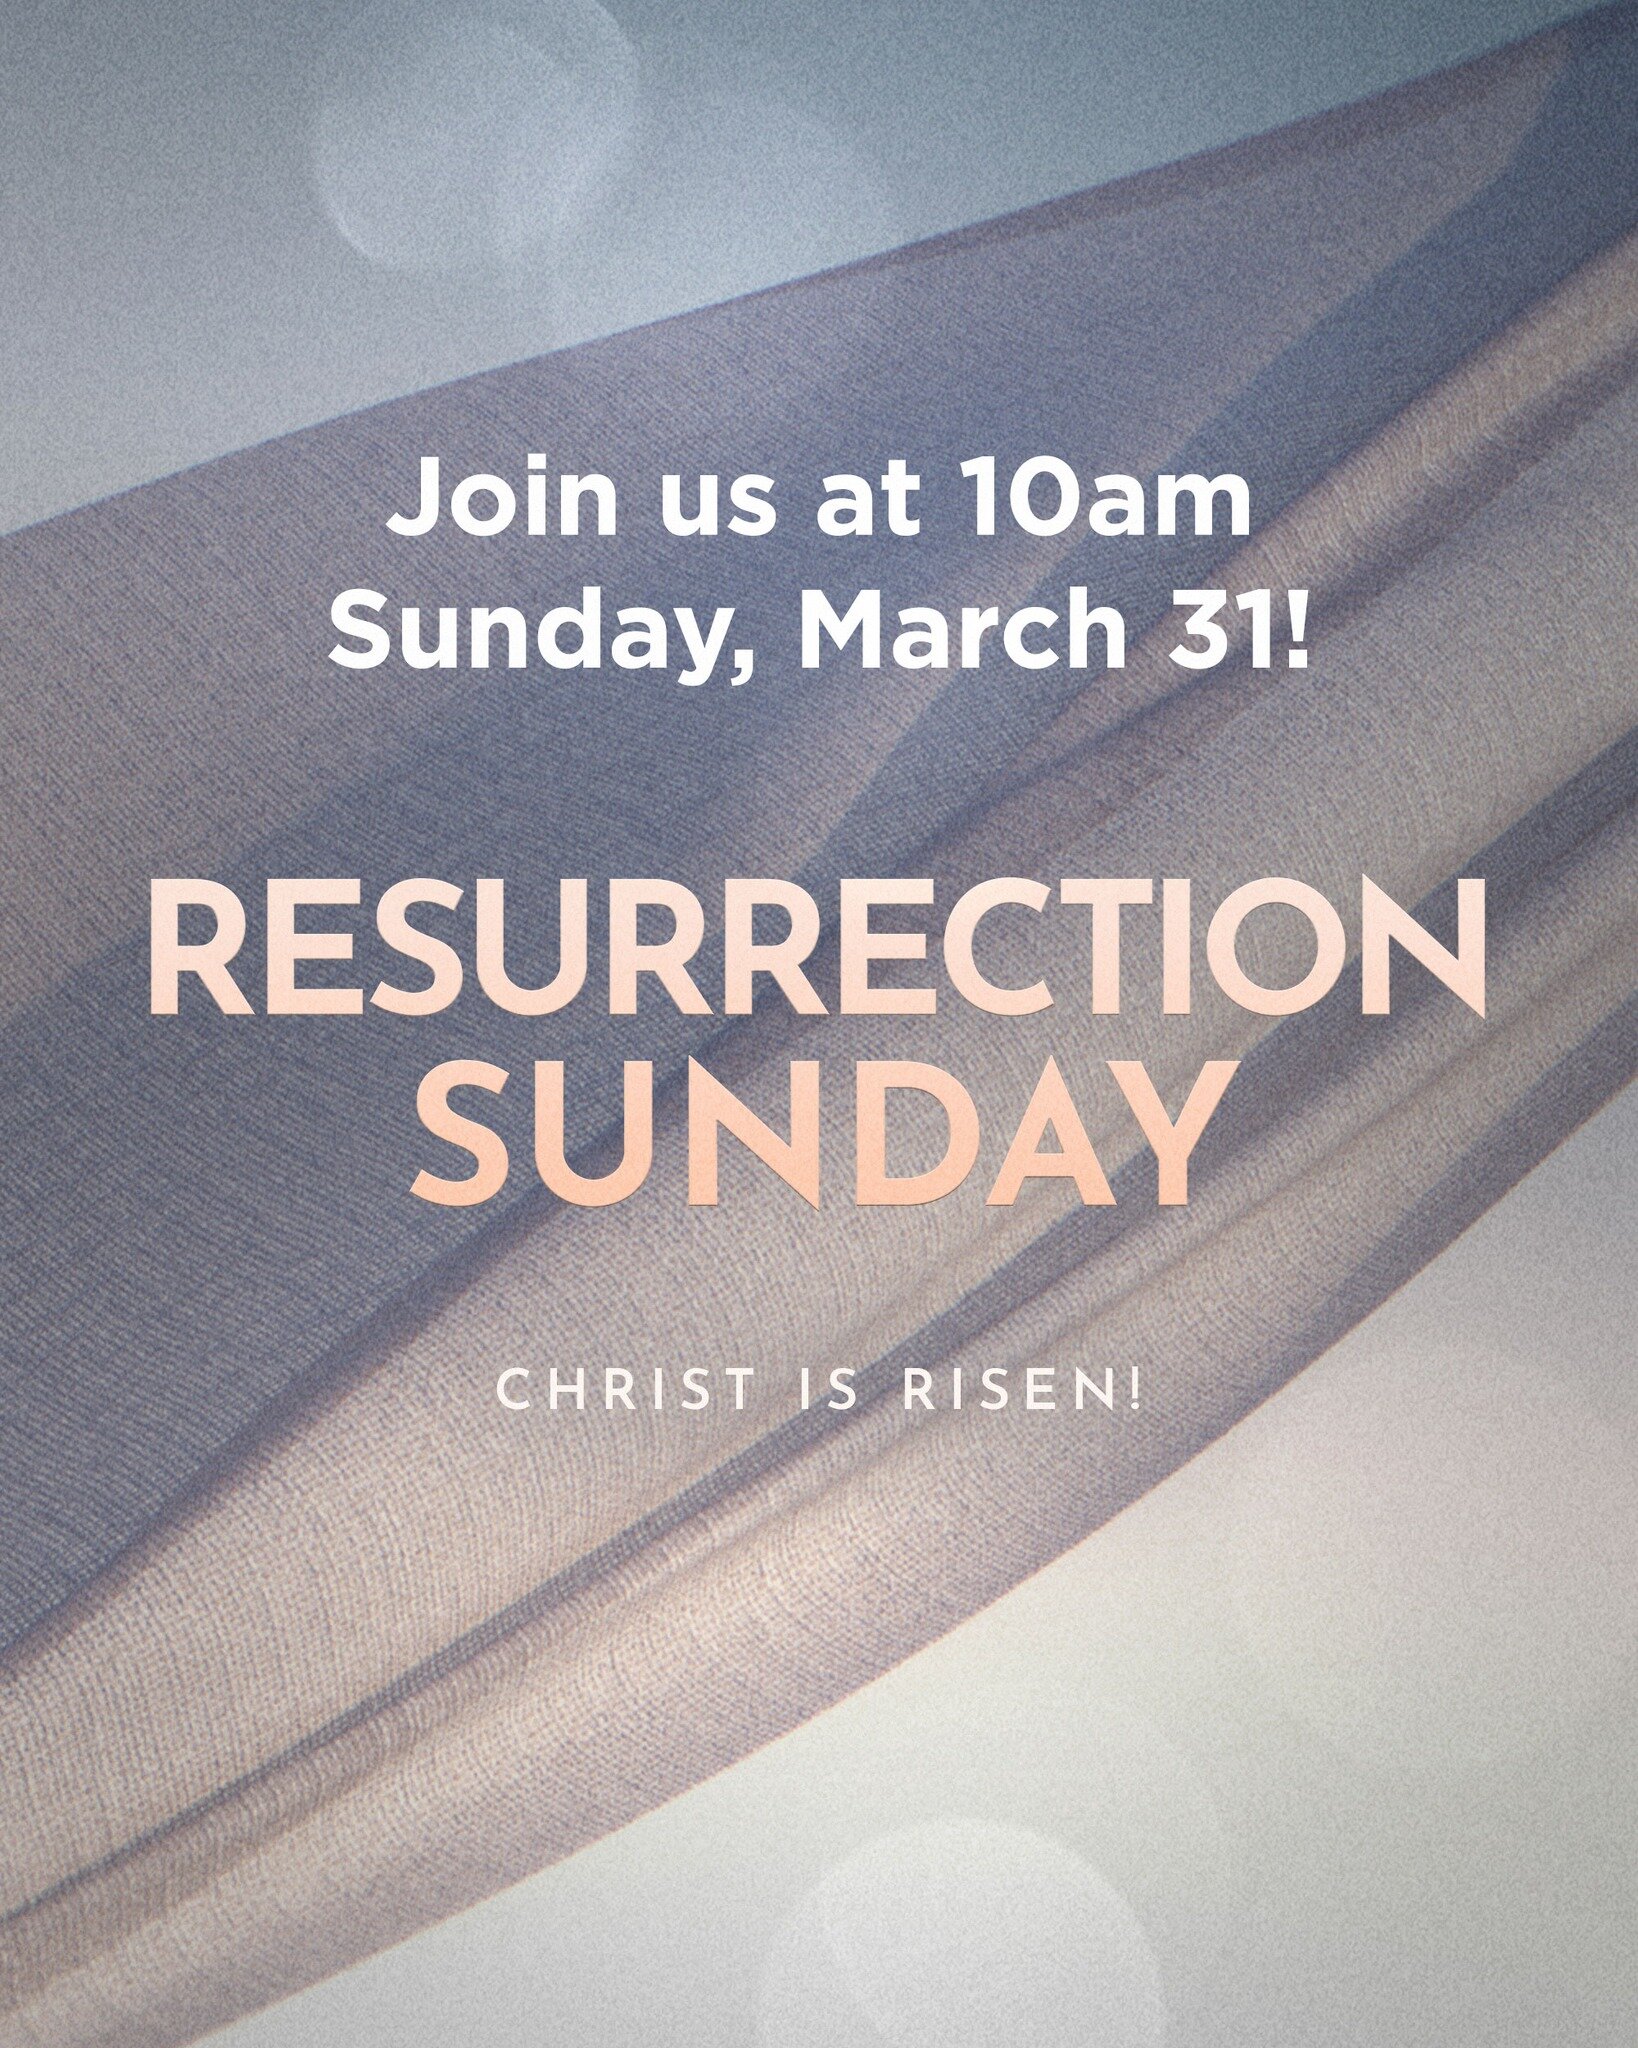 Join us this Resurrection Sunday as we celebrate Jesus' resurrection together at our 10am service! We can't wait to see you!

(Children's Equipping Center classes will be available, teens will remain in the main service.)